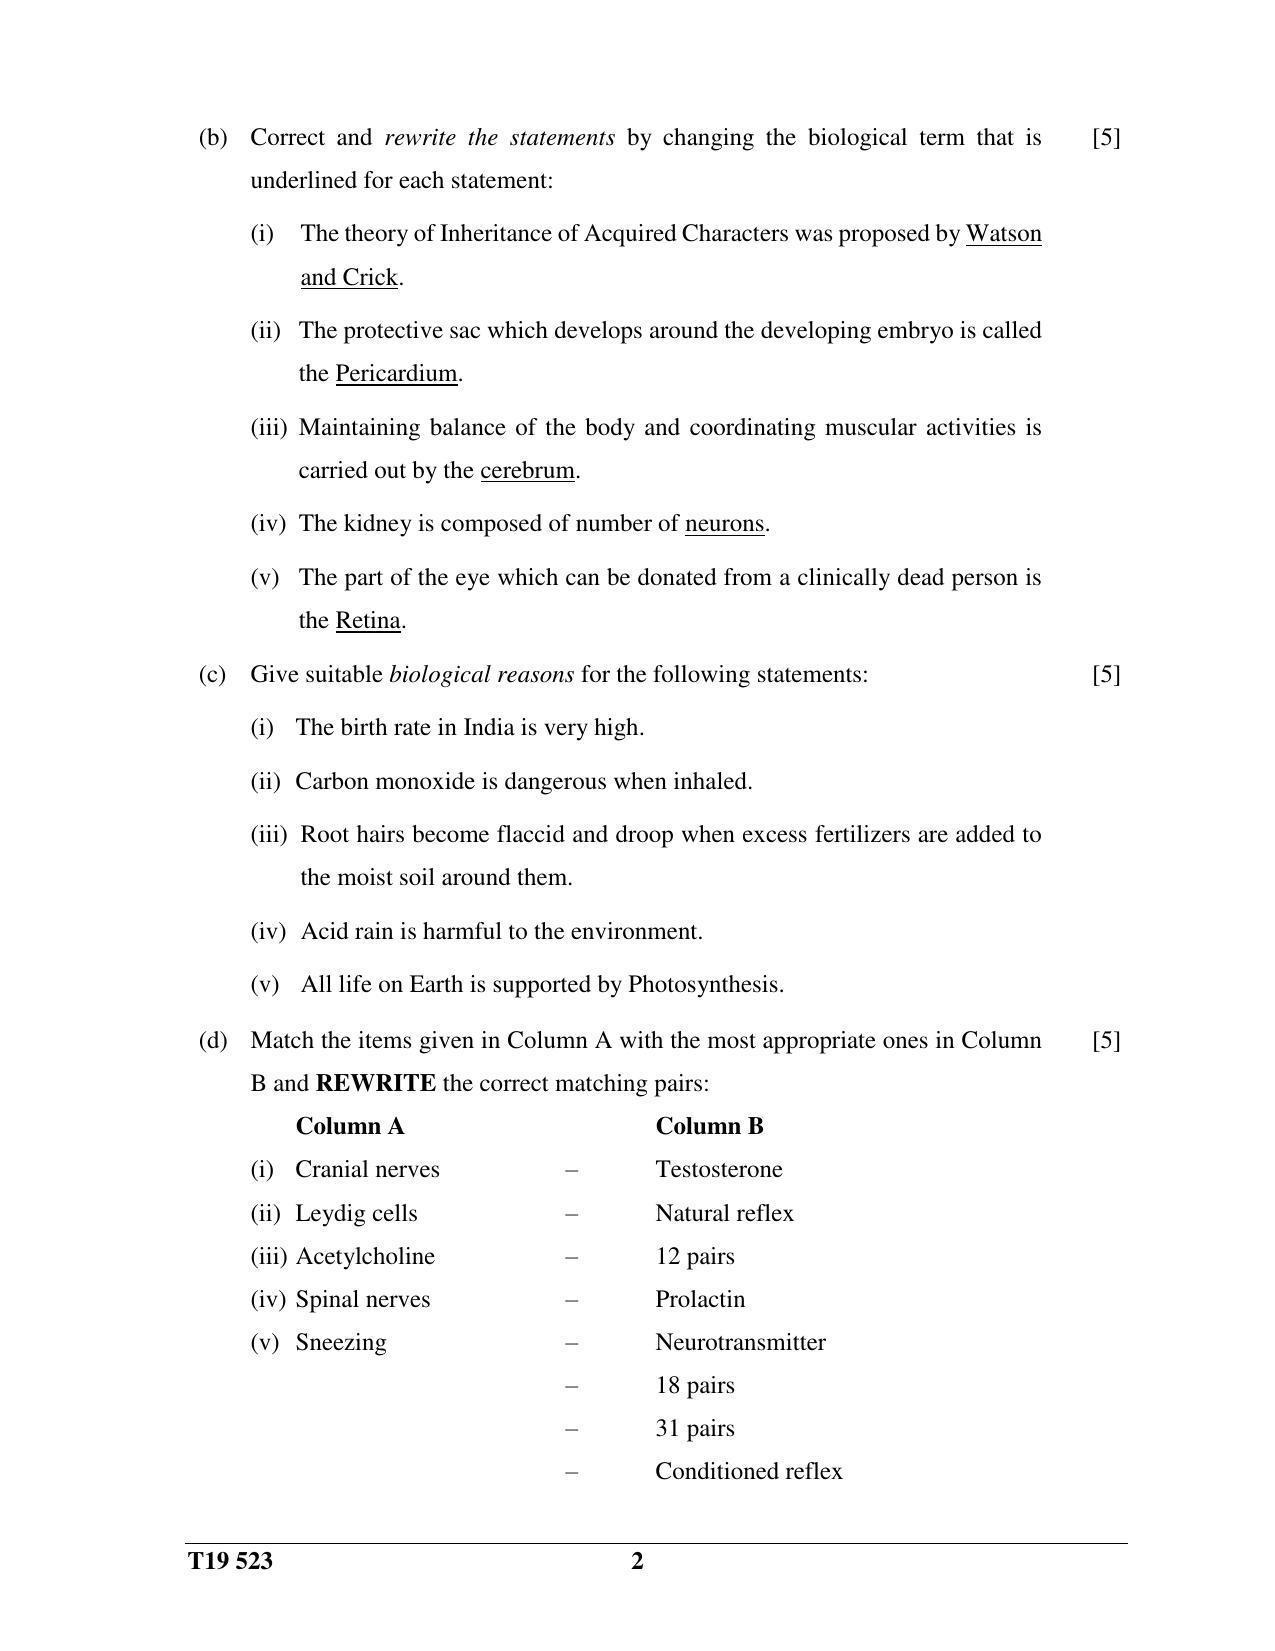 ICSE Class 10 Science Paper 3 (Biology) 2019 Question Paper - Page 2